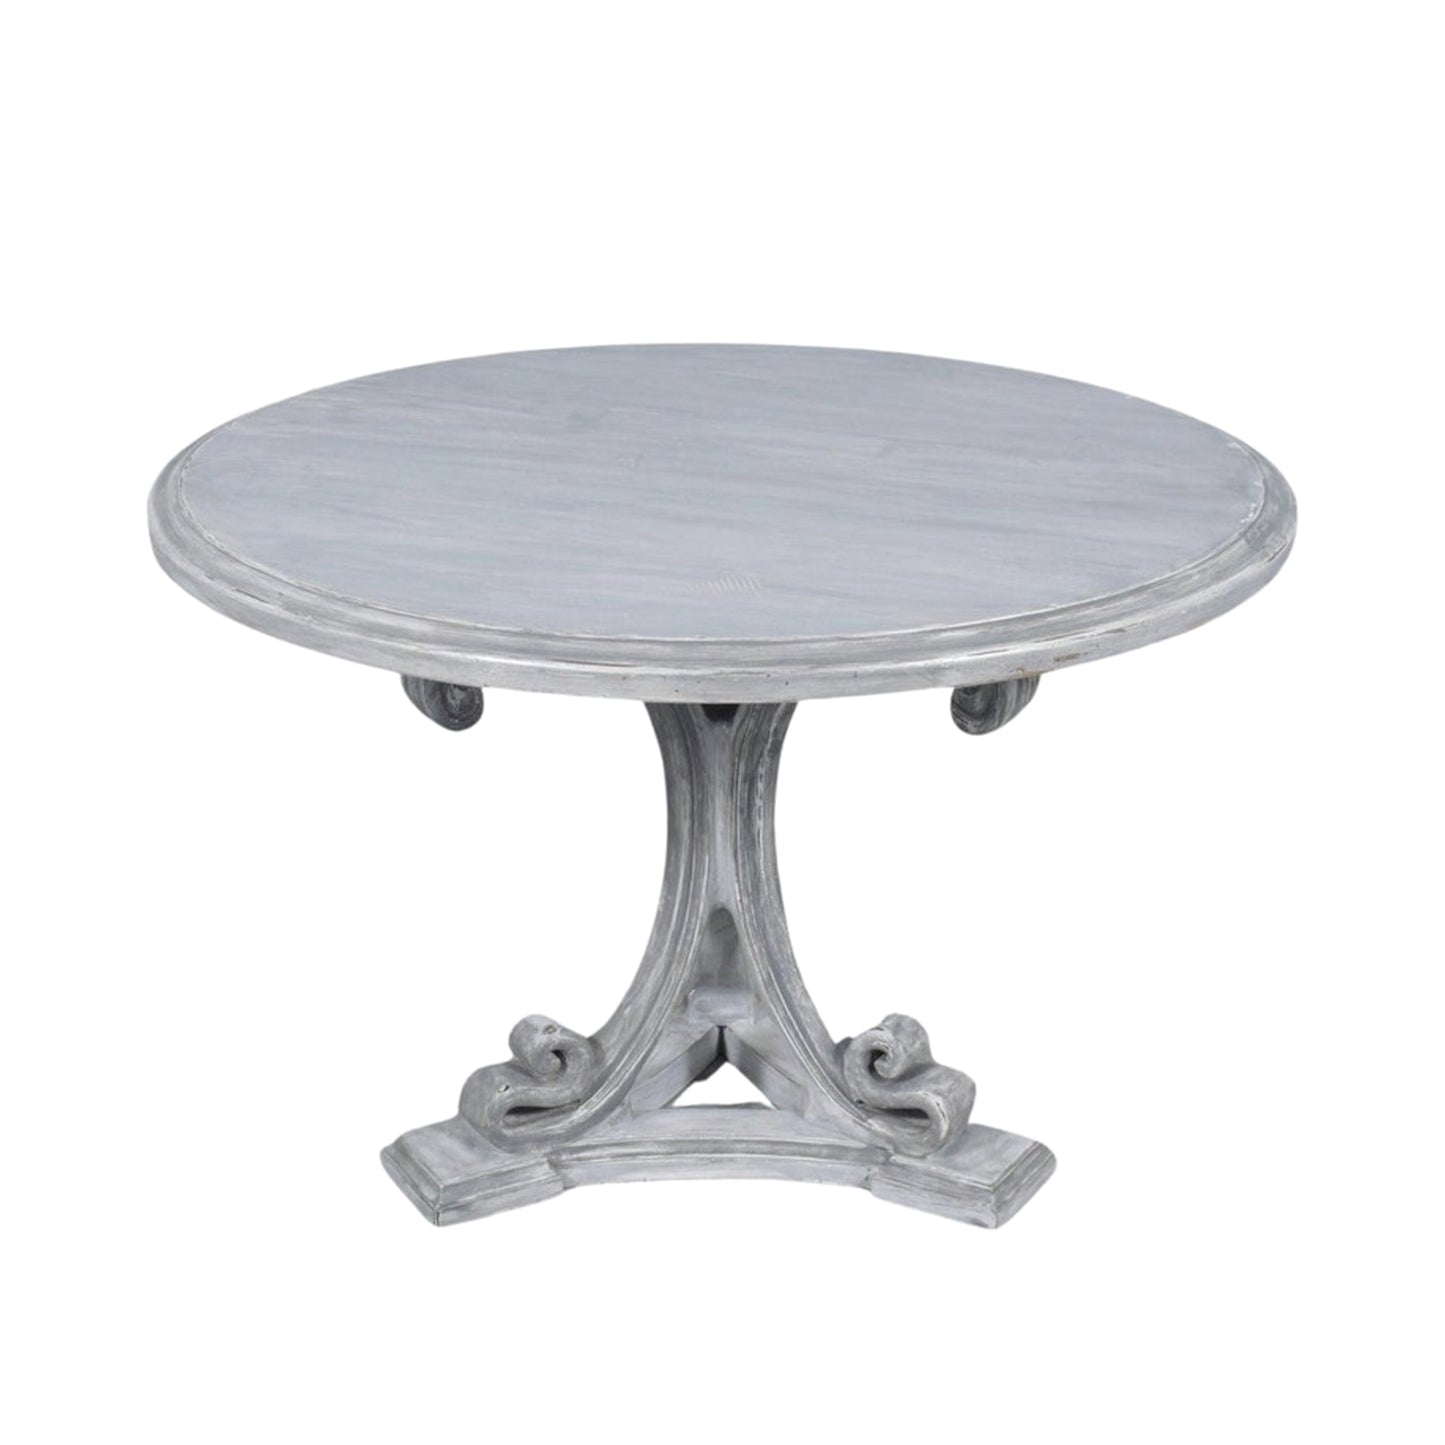 Vintage American Regency Walnut Round Dining Table with Distressed Grey Finish